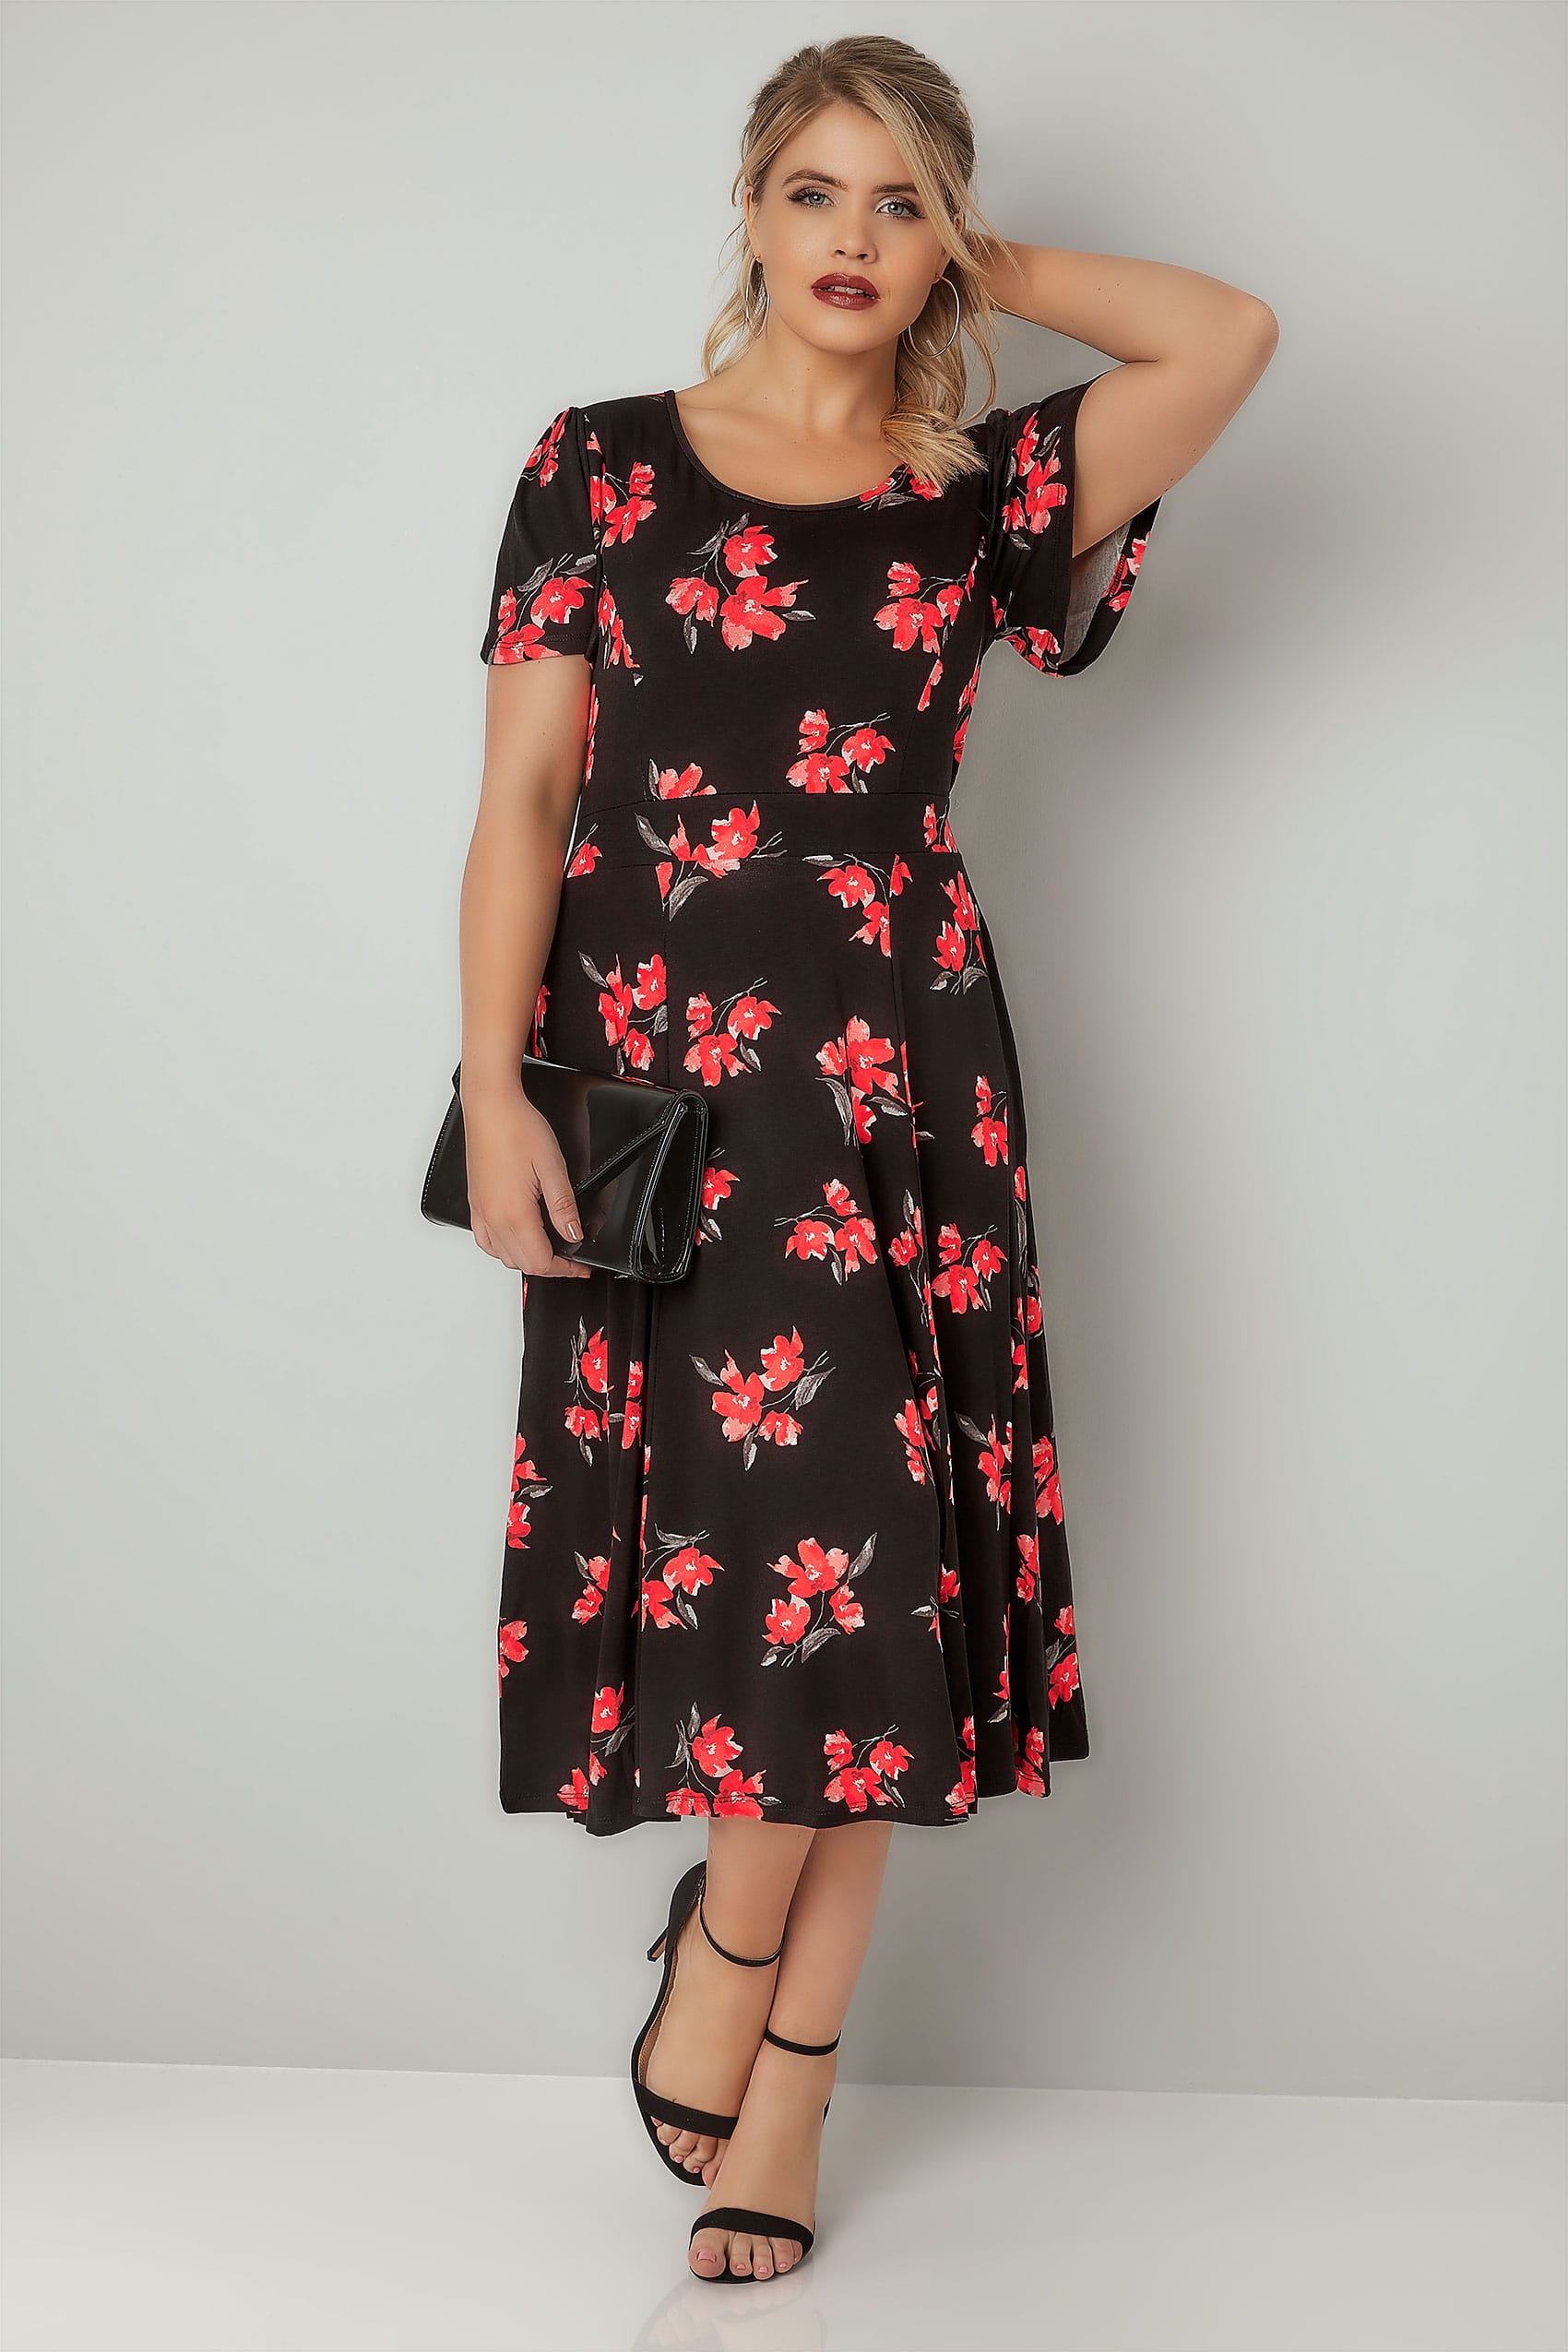 Black Floral Print Skater Dress With Self Tie Waist, Plus size 16 to 36